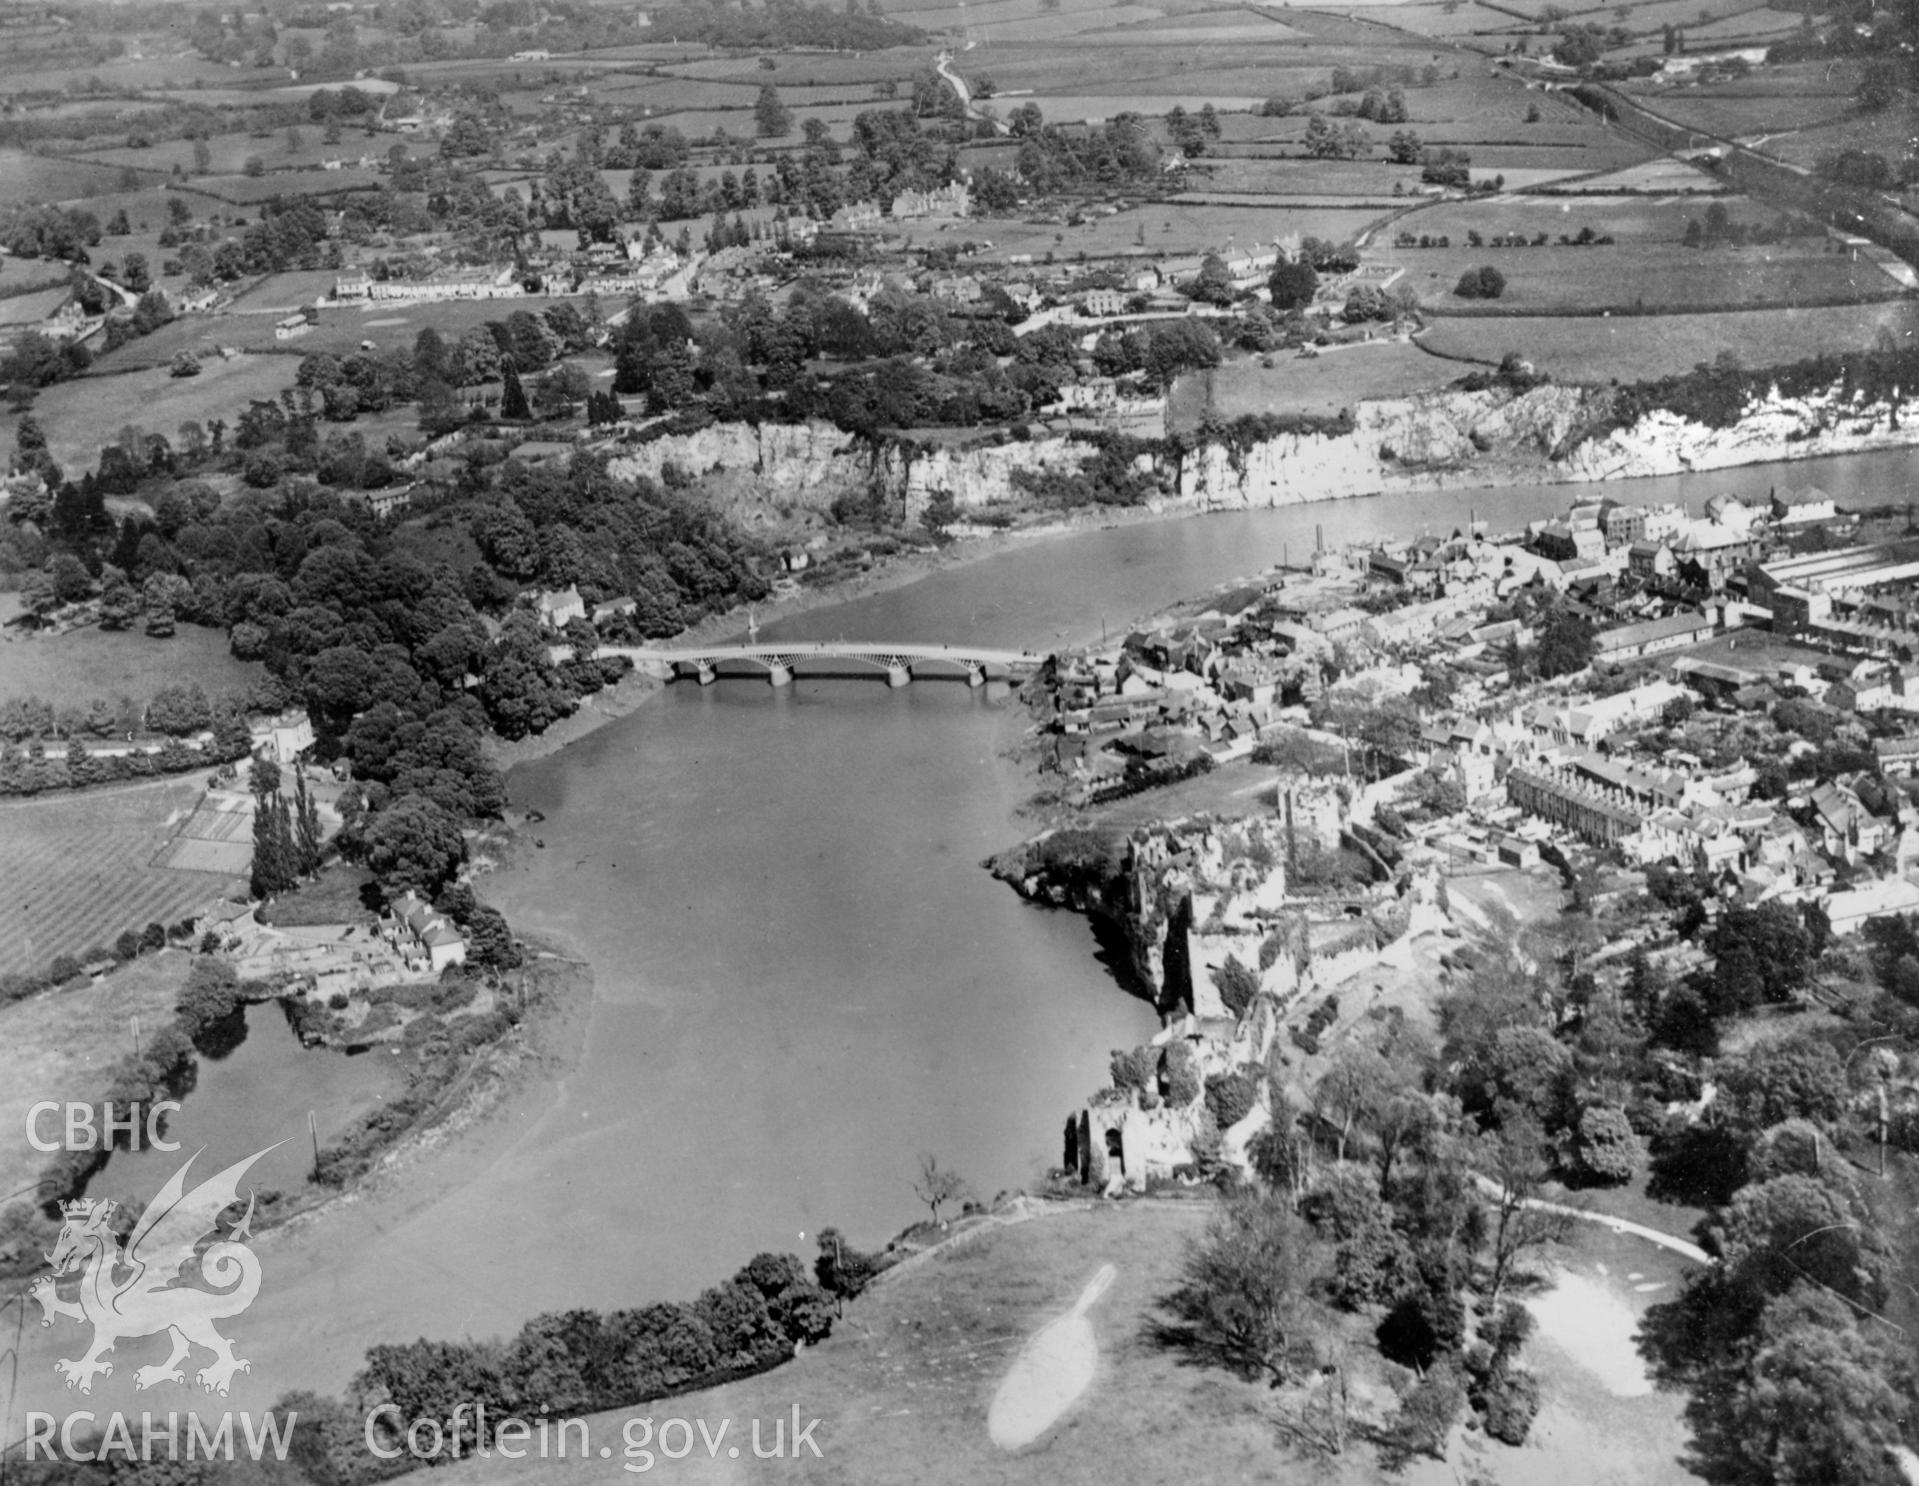 View of Chepstow showing the road bridge over the river Wye and the castle. Oblique aerial photograph, 5?x4? BW glass plate.